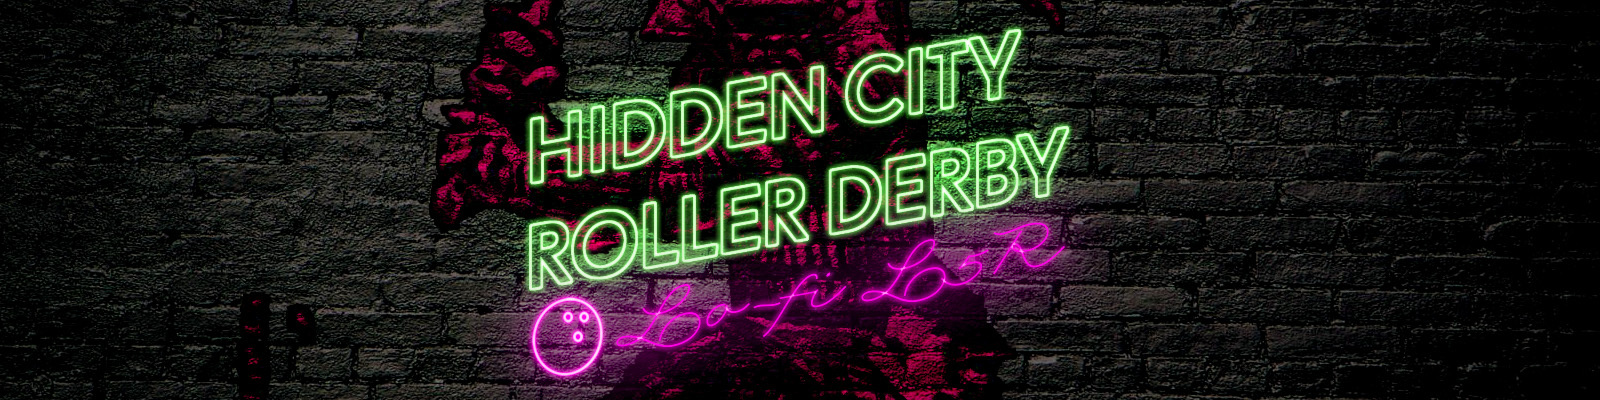 Hidden City Roller Derby - A Legend of the Five Rings podcast